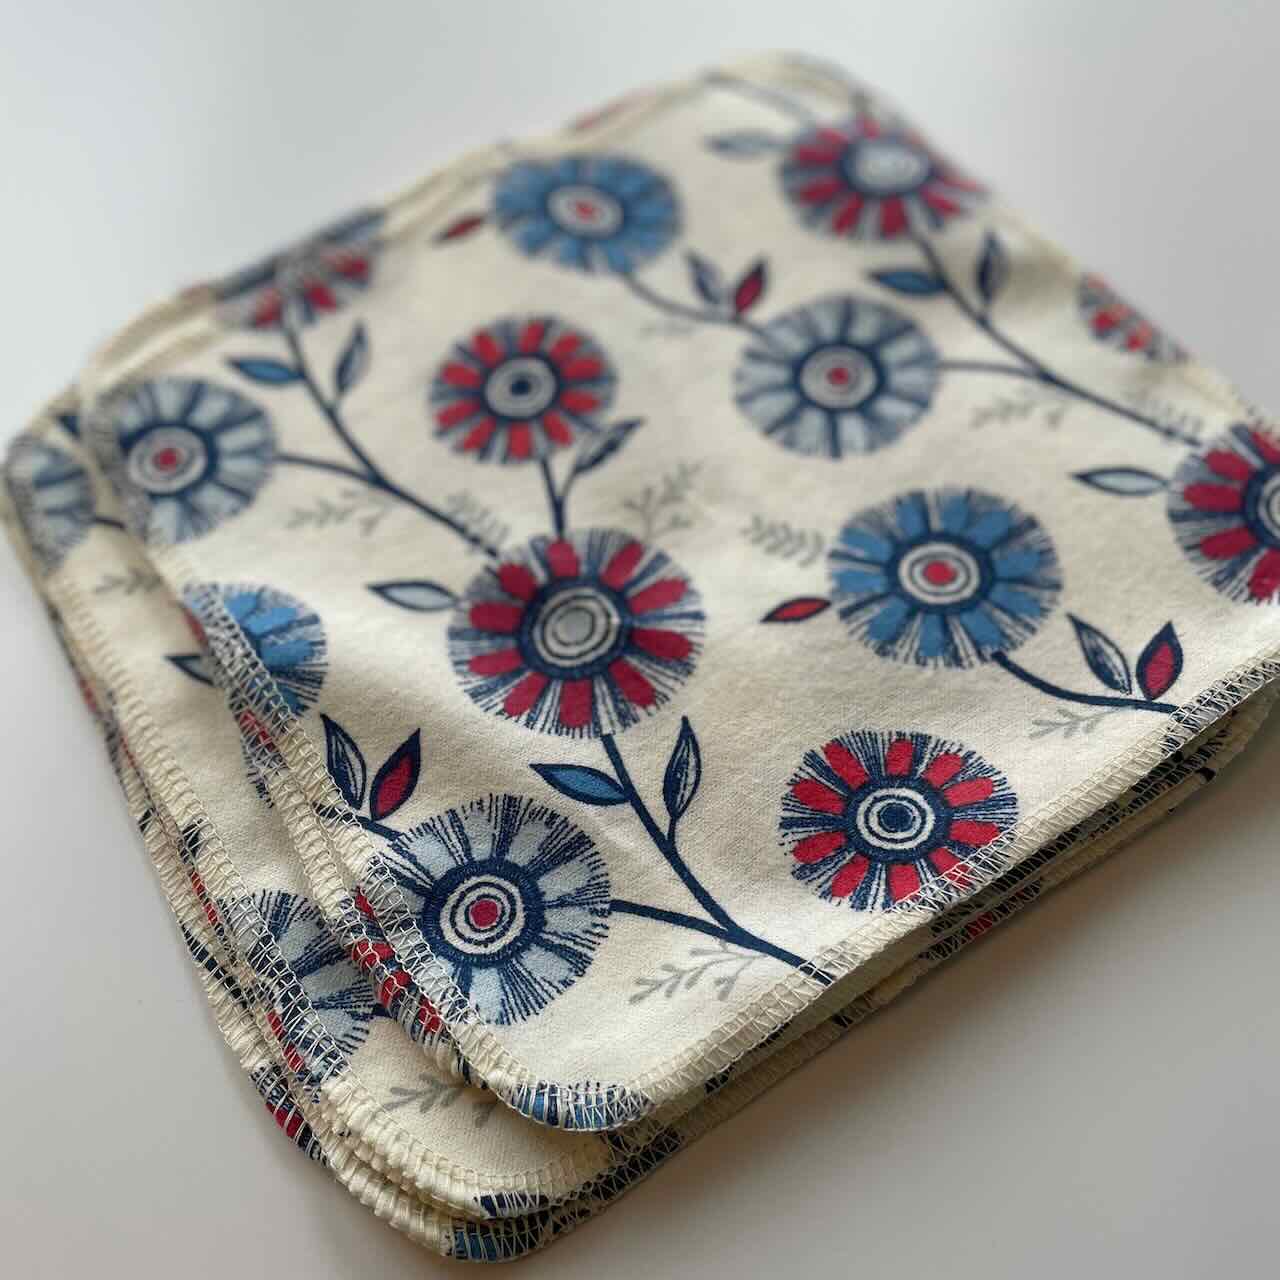 flat lay of a set of 10 reusable cloth wipes, with vibrant flower patterns printed on the fabric, side view.